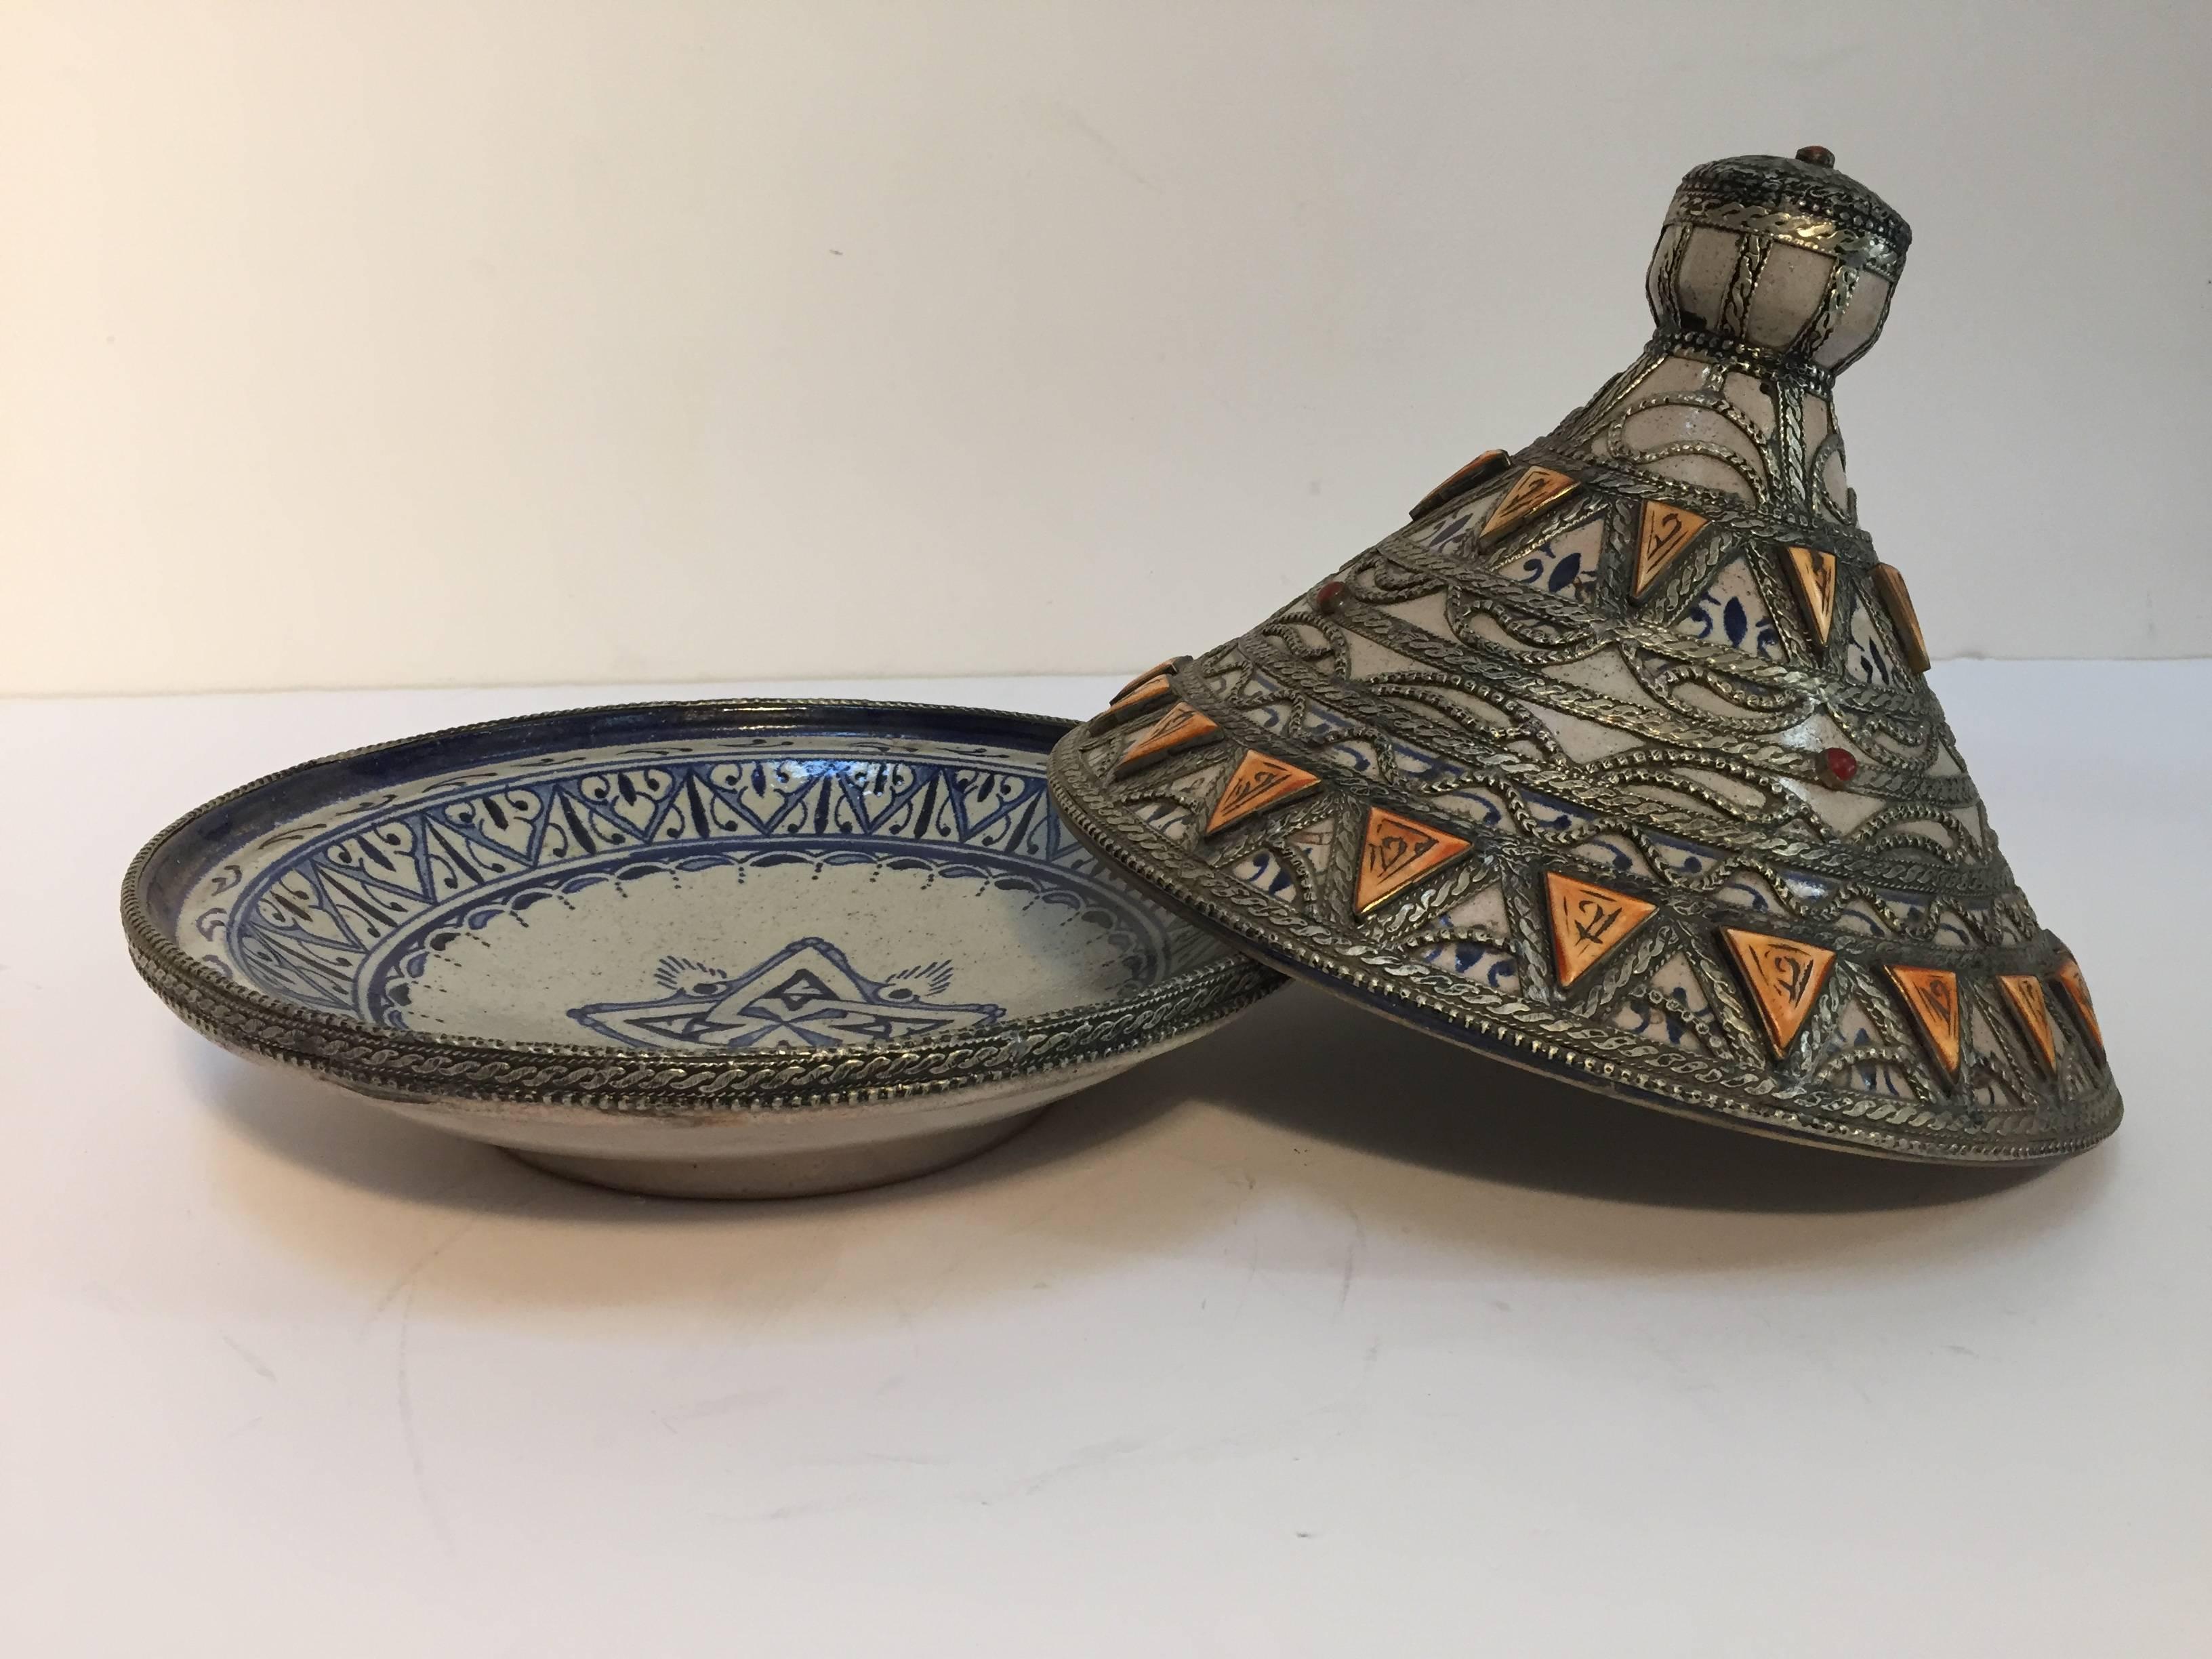 Hand-Crafted Moroccan Ceramic Polychrome Tajine with Leather Stones and Metal Overlay